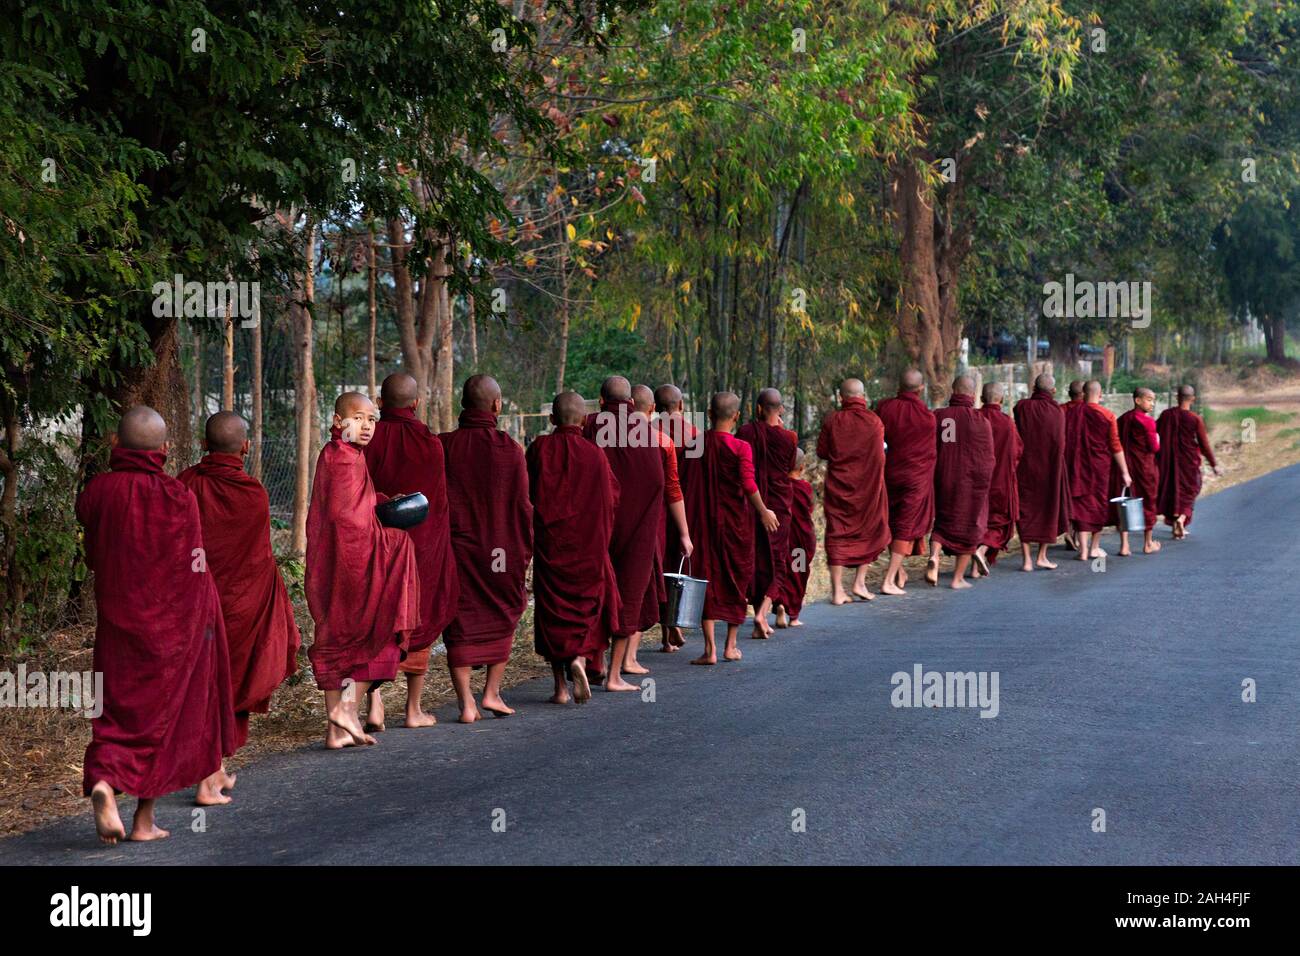 Monks lined up walk on the road to collect alms, in Inle Lake, Myanmar Stock Photo